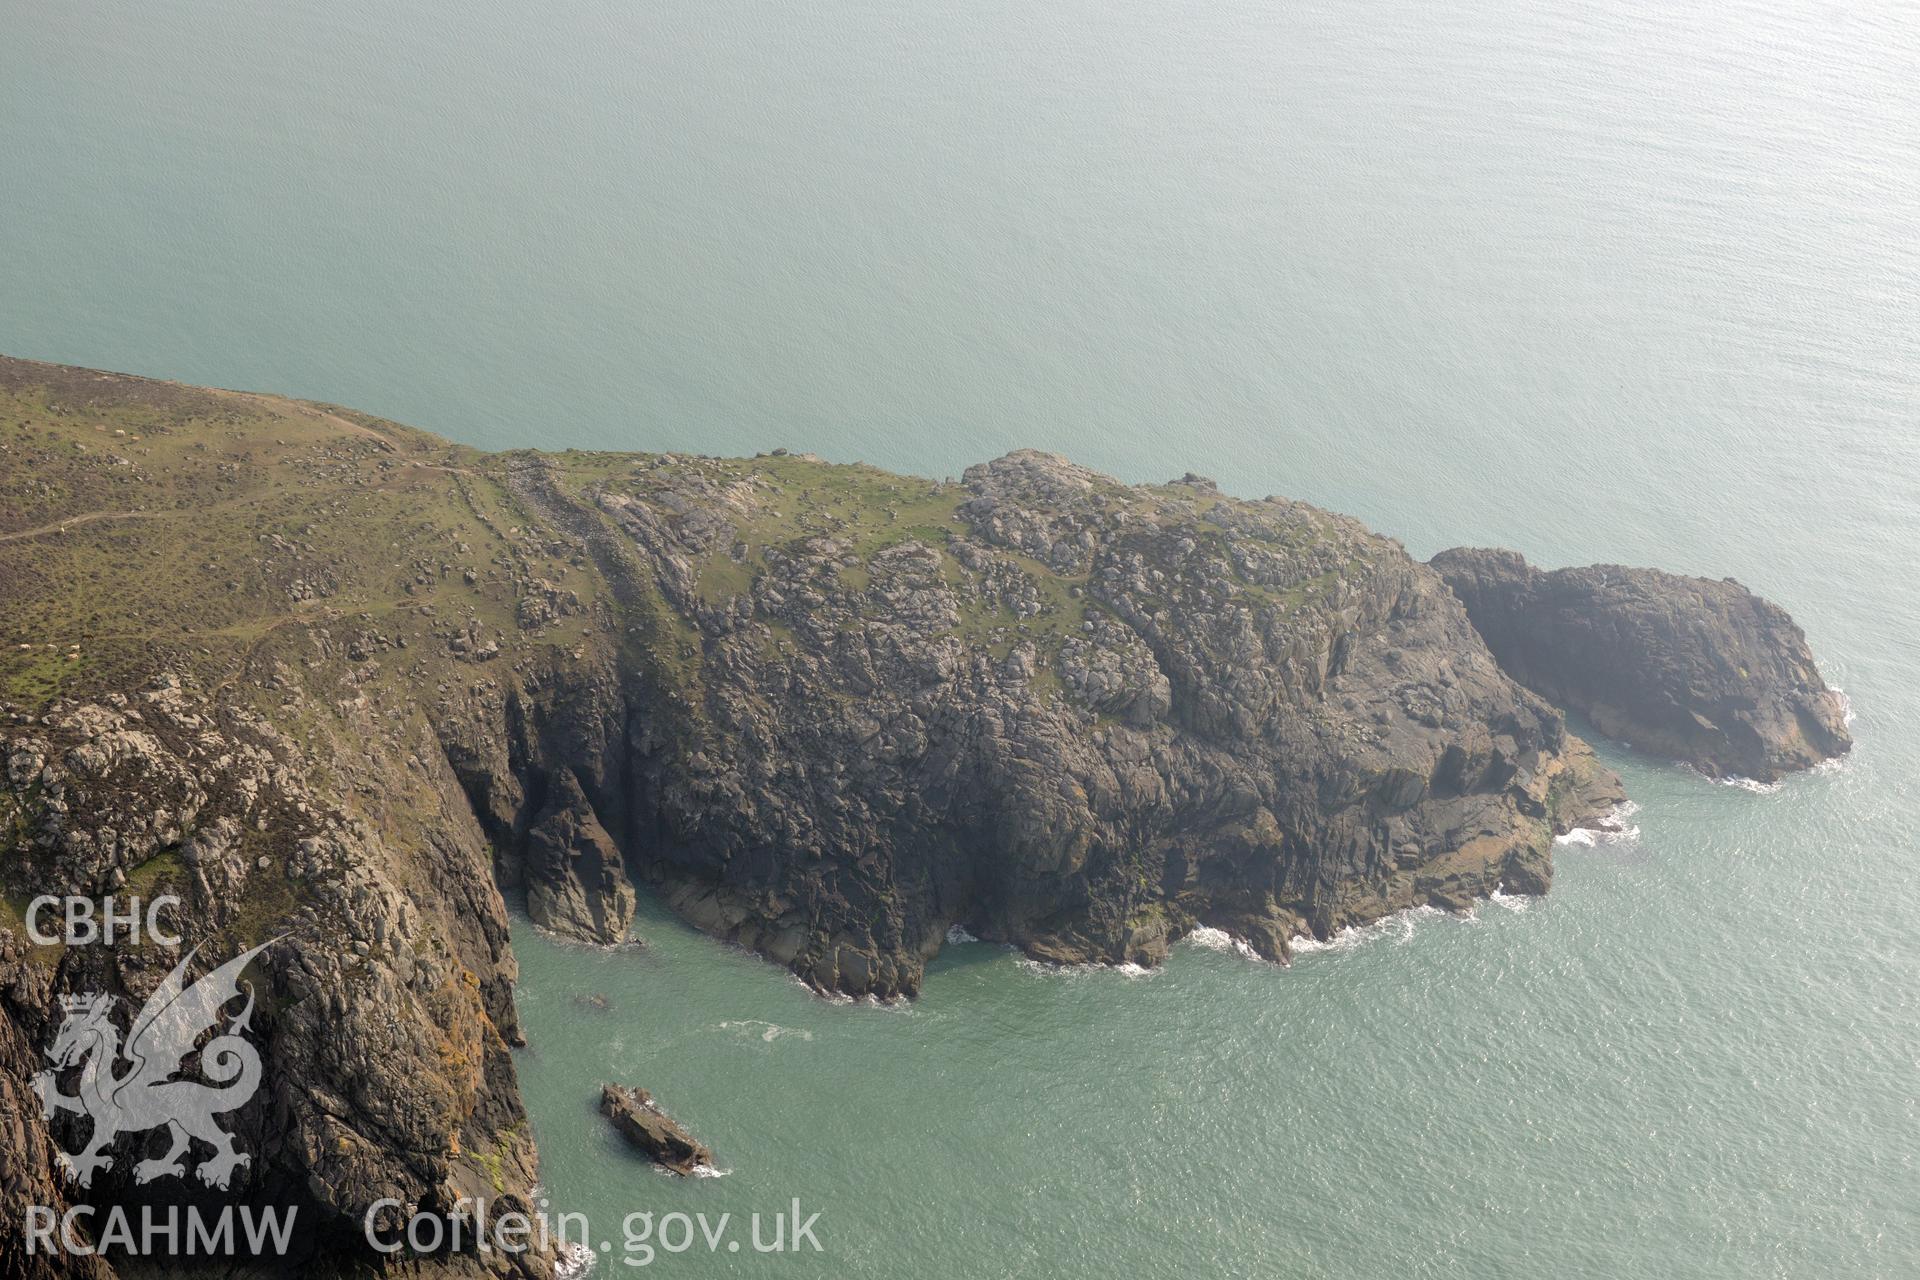 Aerial photography of St Davids Head camp taken on 27th March 2017. Baseline aerial reconnaissance survey for the CHERISH Project. ? Crown: CHERISH PROJECT 2019. Produced with EU funds through the Ireland Wales Co-operation Programme 2014-2020. All material made freely available through the Open Government Licence.